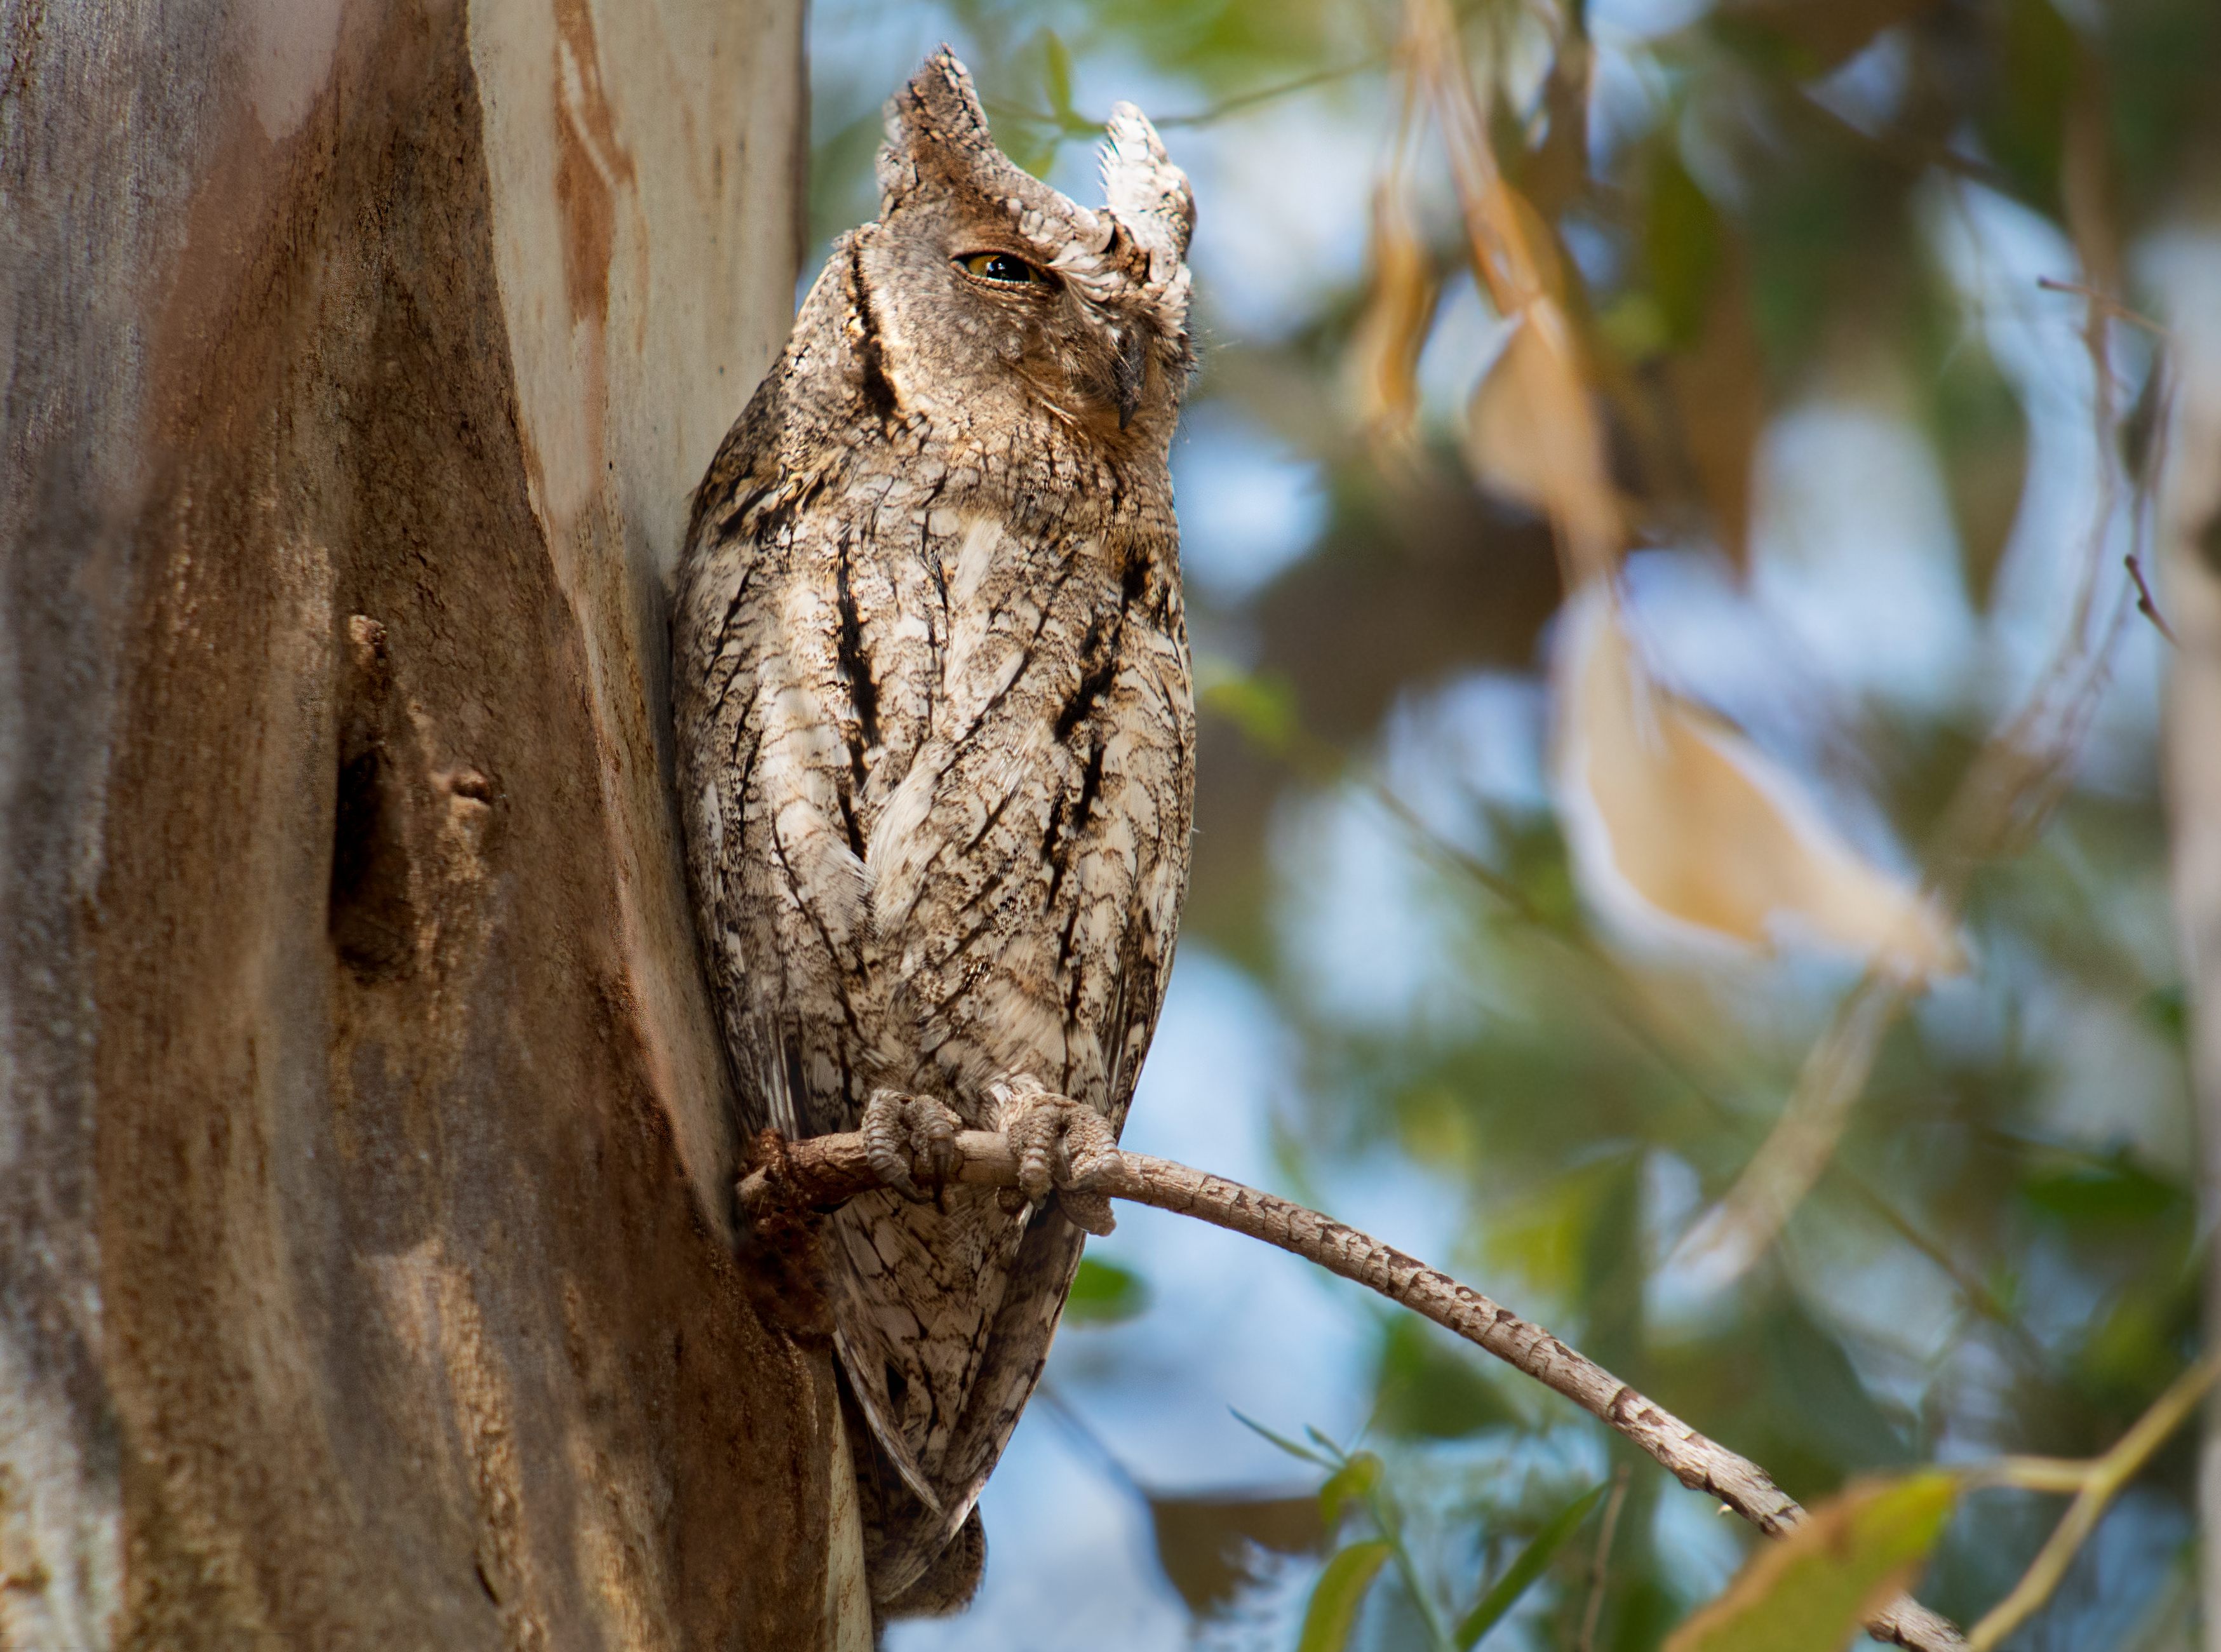 Brown eurasian scops owl siiting on a branch of a tree